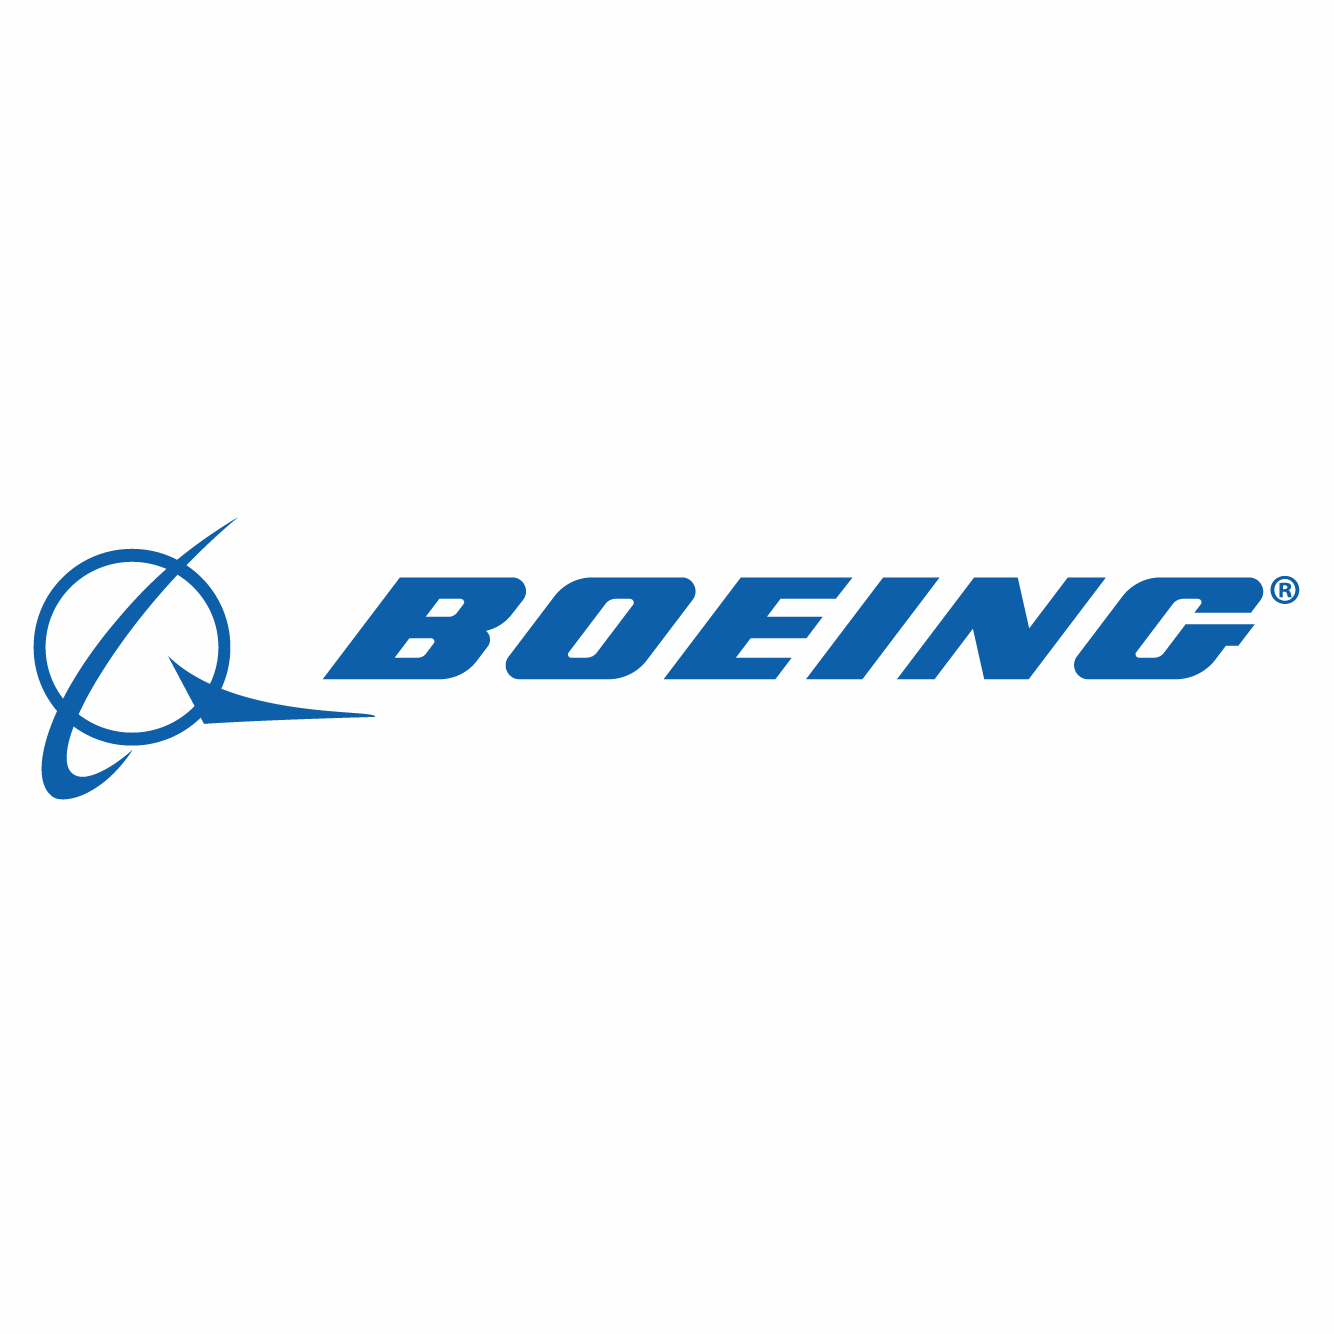 http://securetech.ae/wp-content/uploads/2019/02/07.BOEING.png